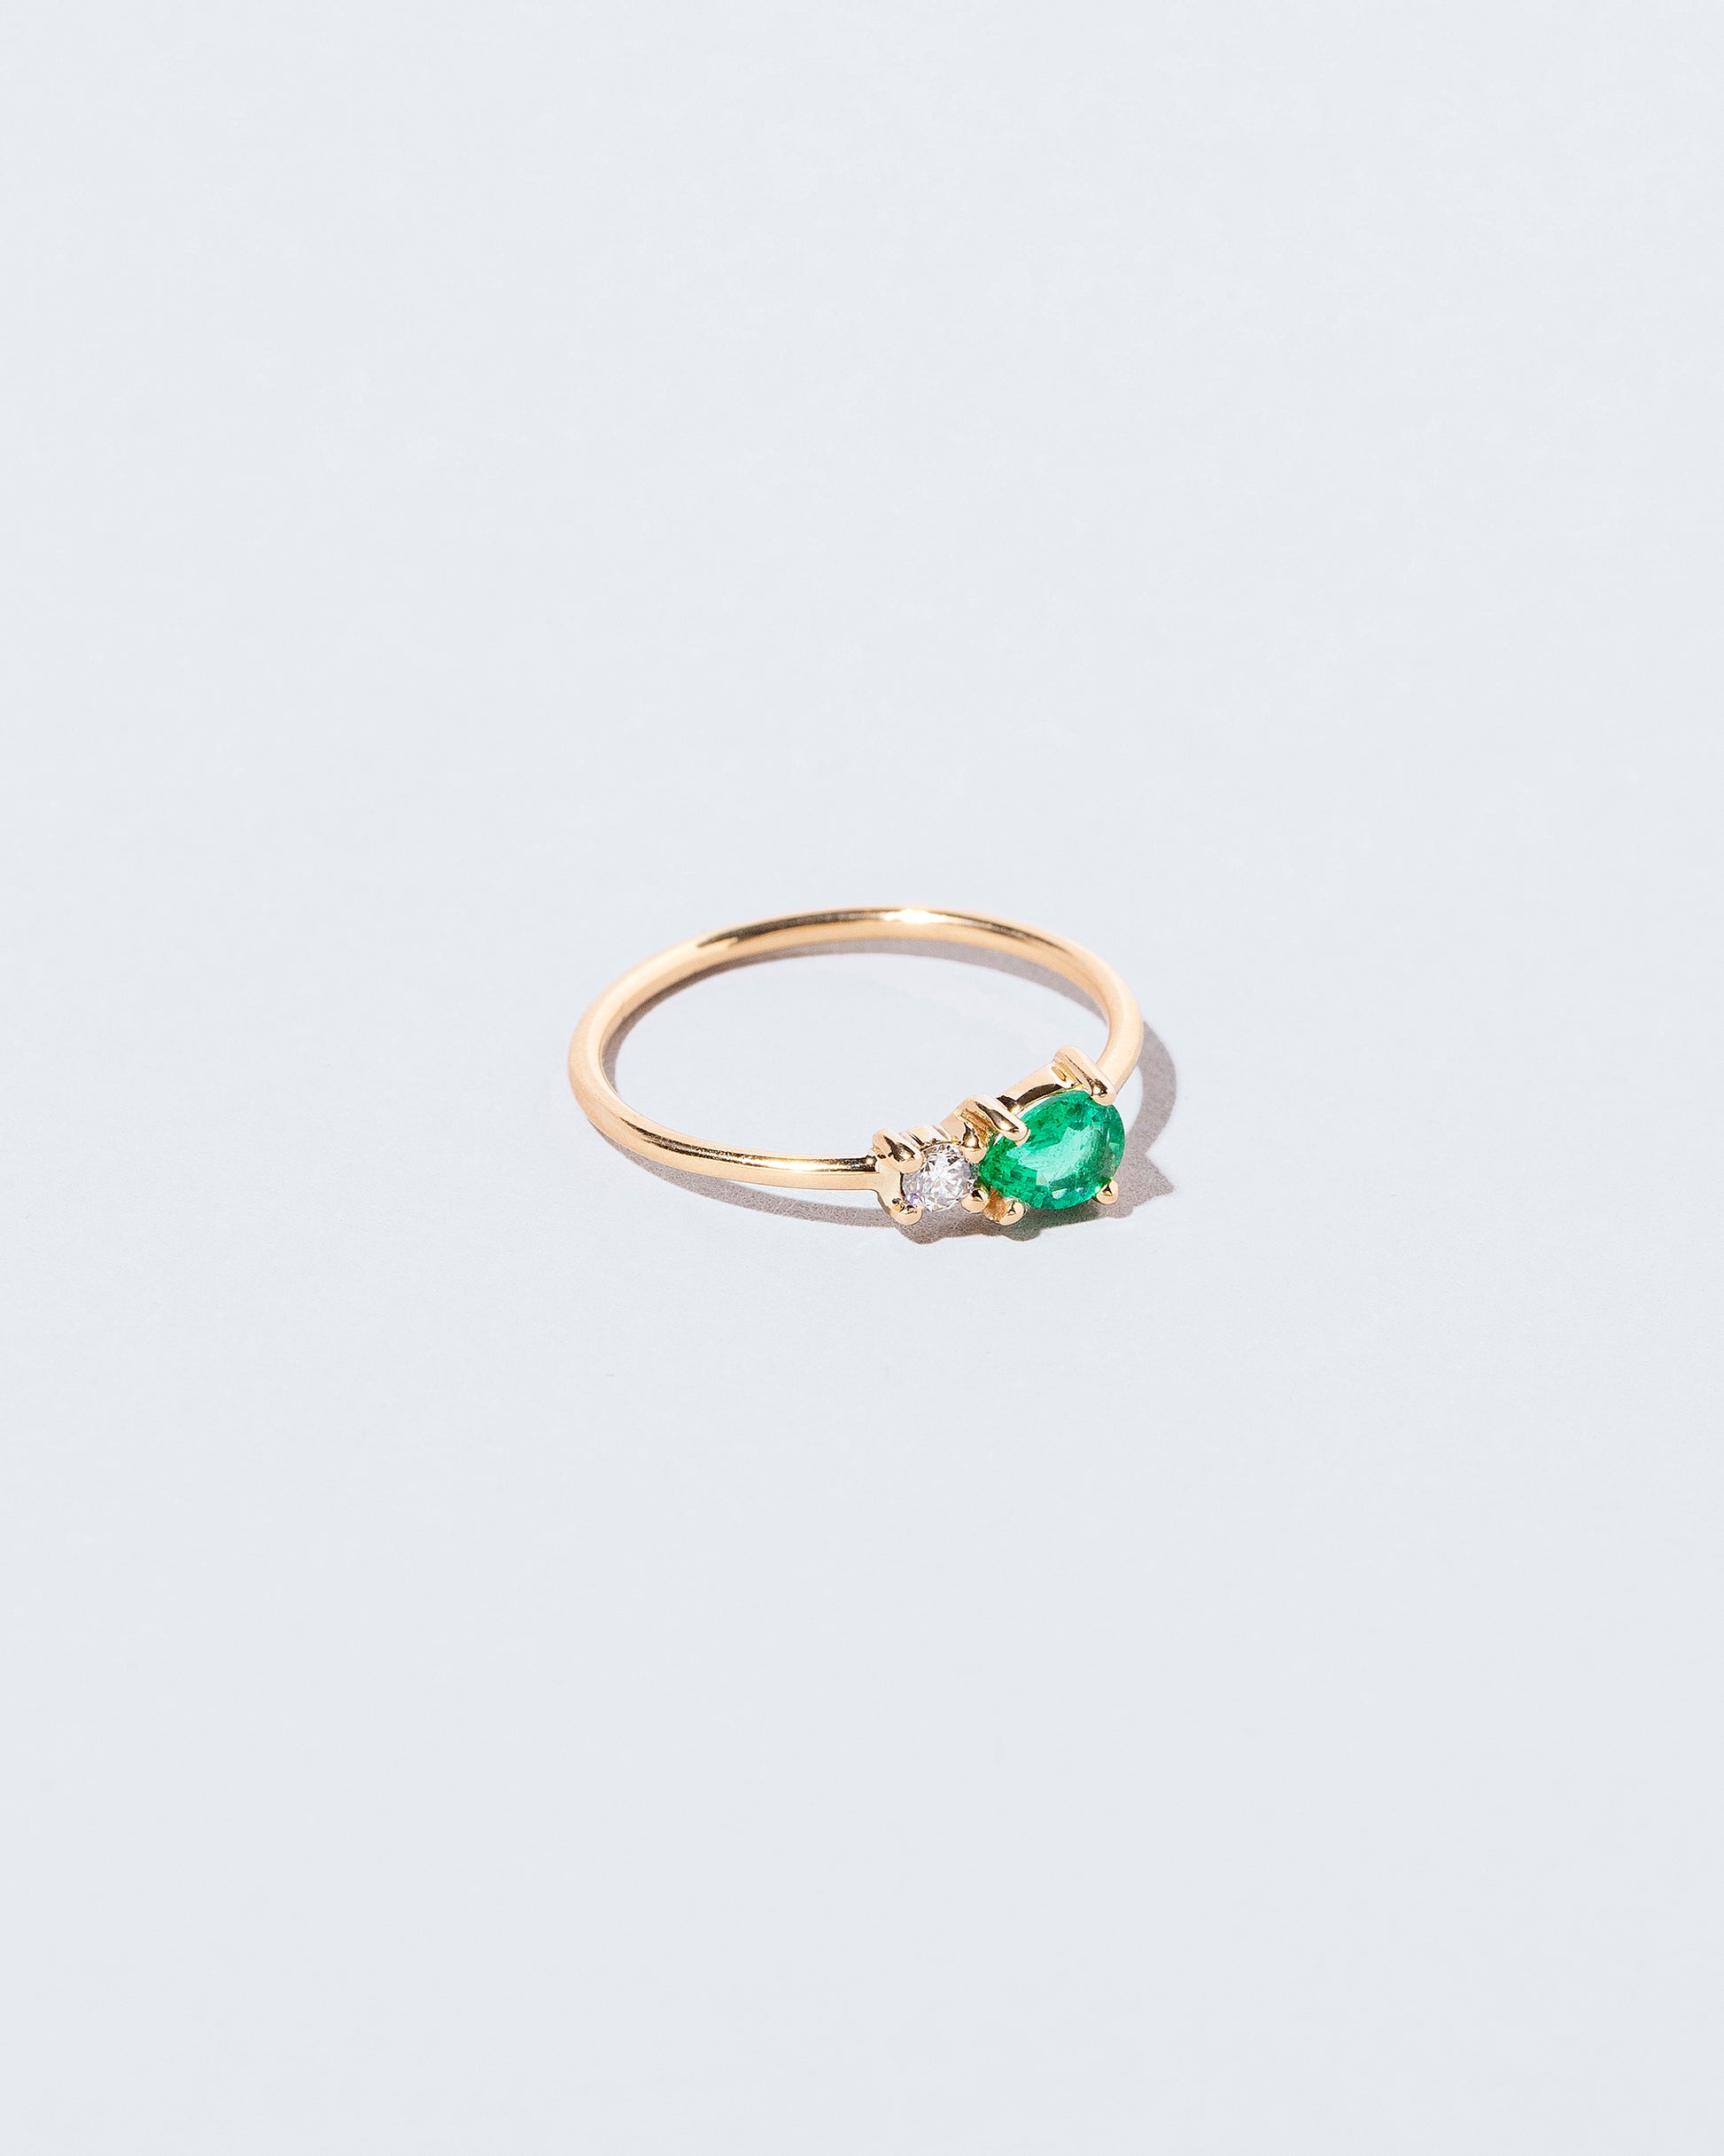 View from the side of the Emerald & Diamond Teardrop Ring on light color background.